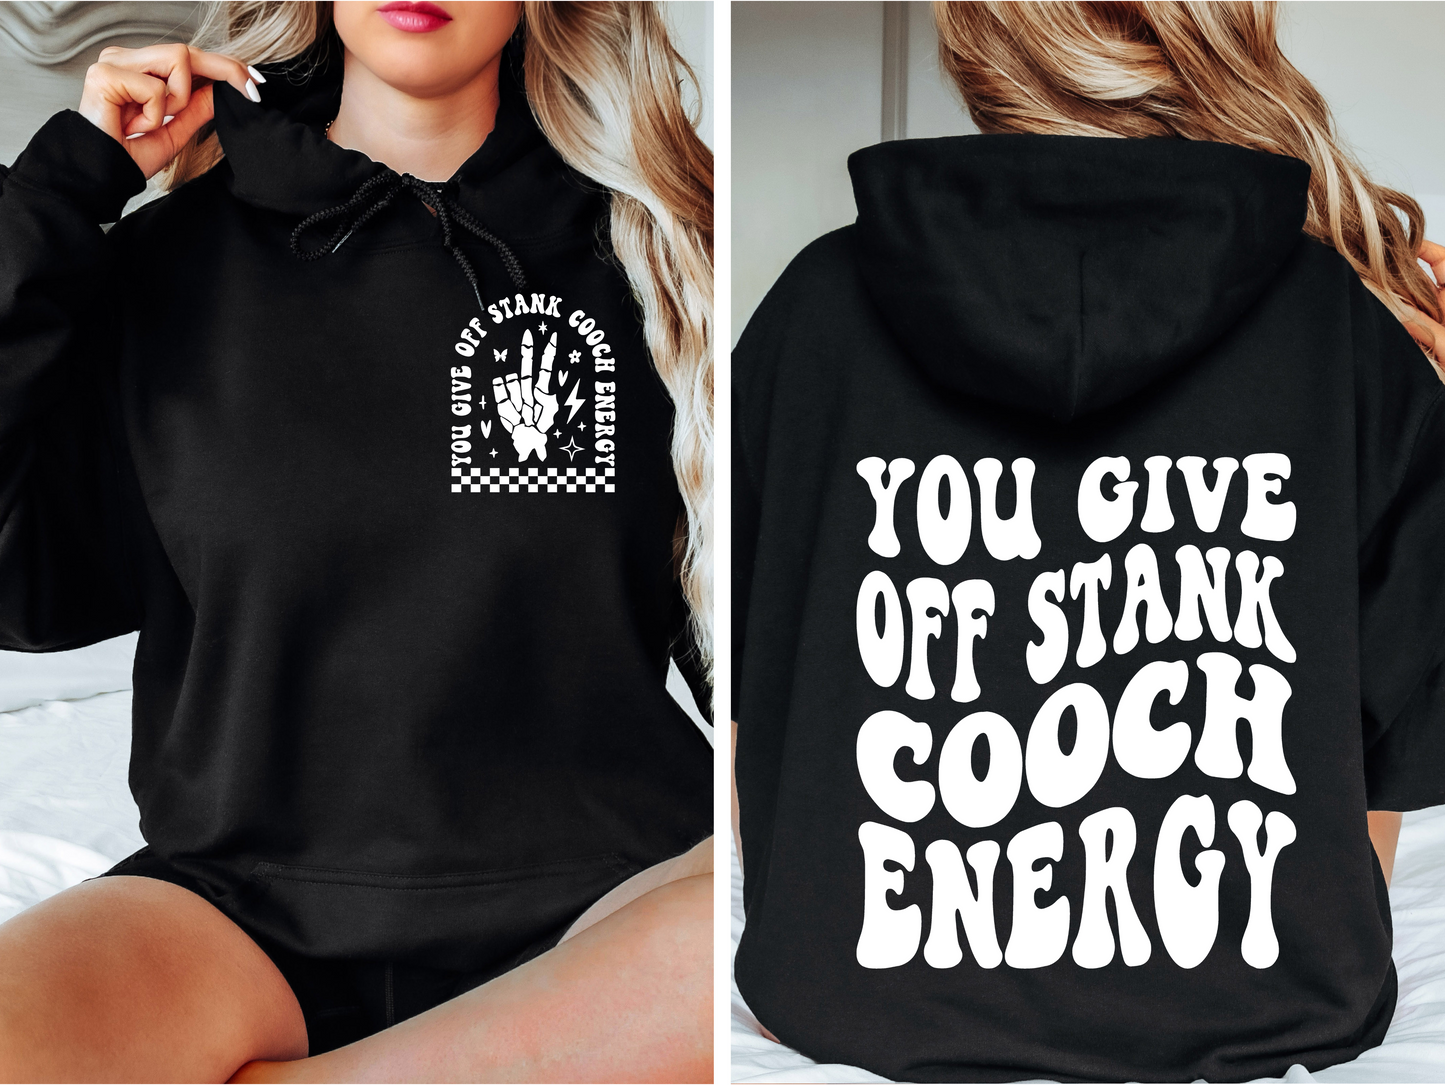 You Give Off Stank Cooch Energy Hoodie